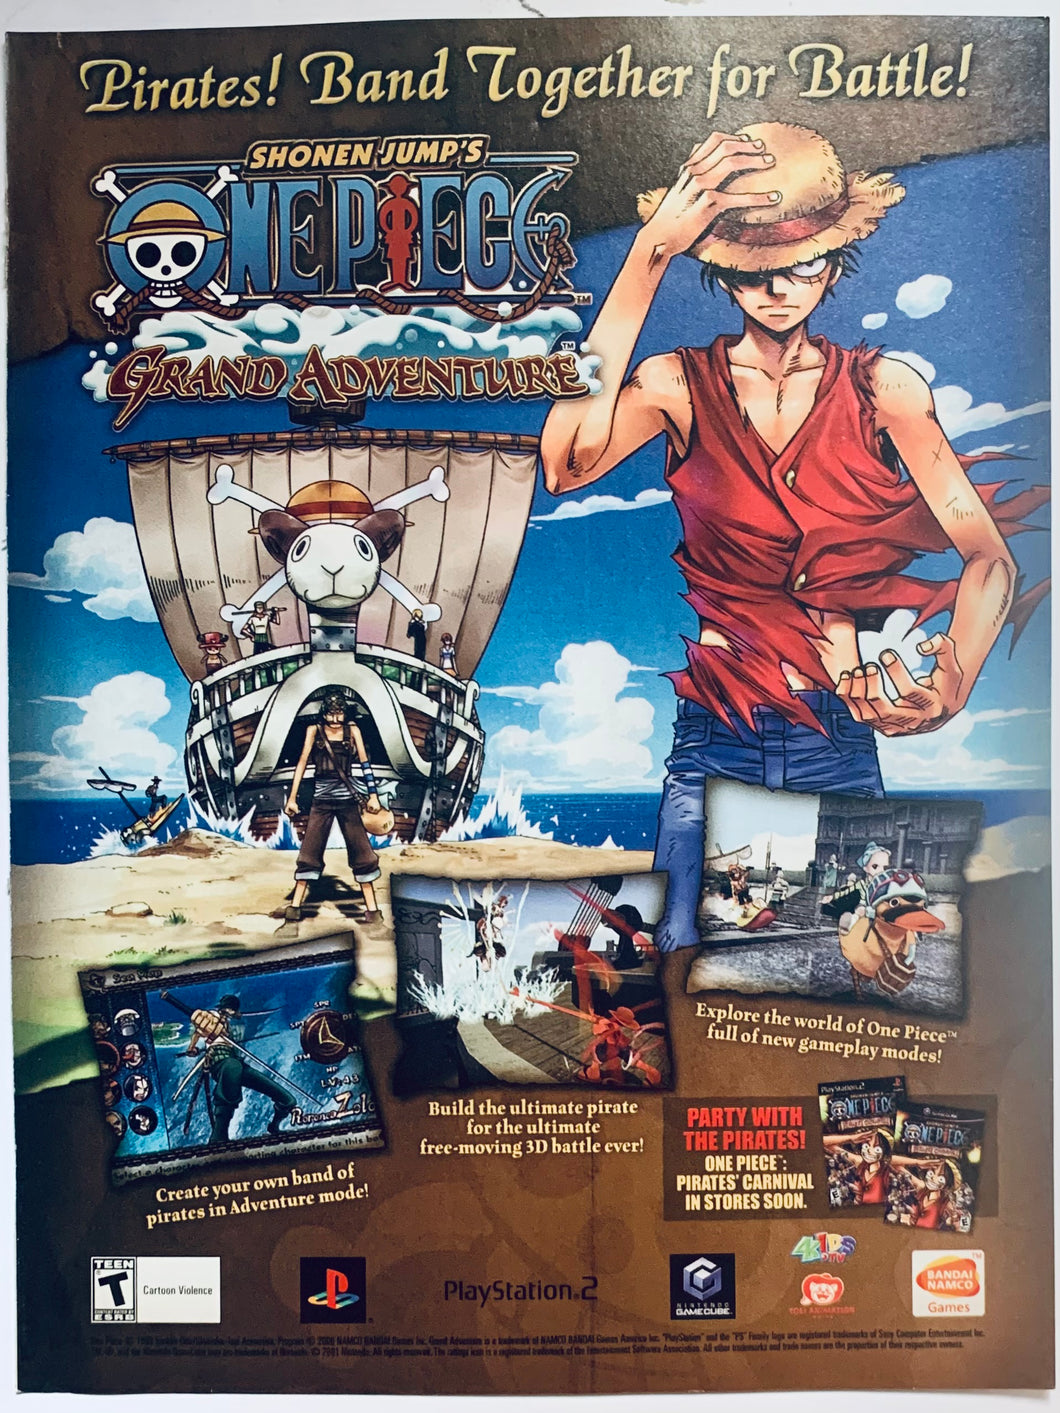 One Piece Grand Adventure - PS2 NGC - Original Vintage Advertisement - Print Ads - Laminated A4 Poster